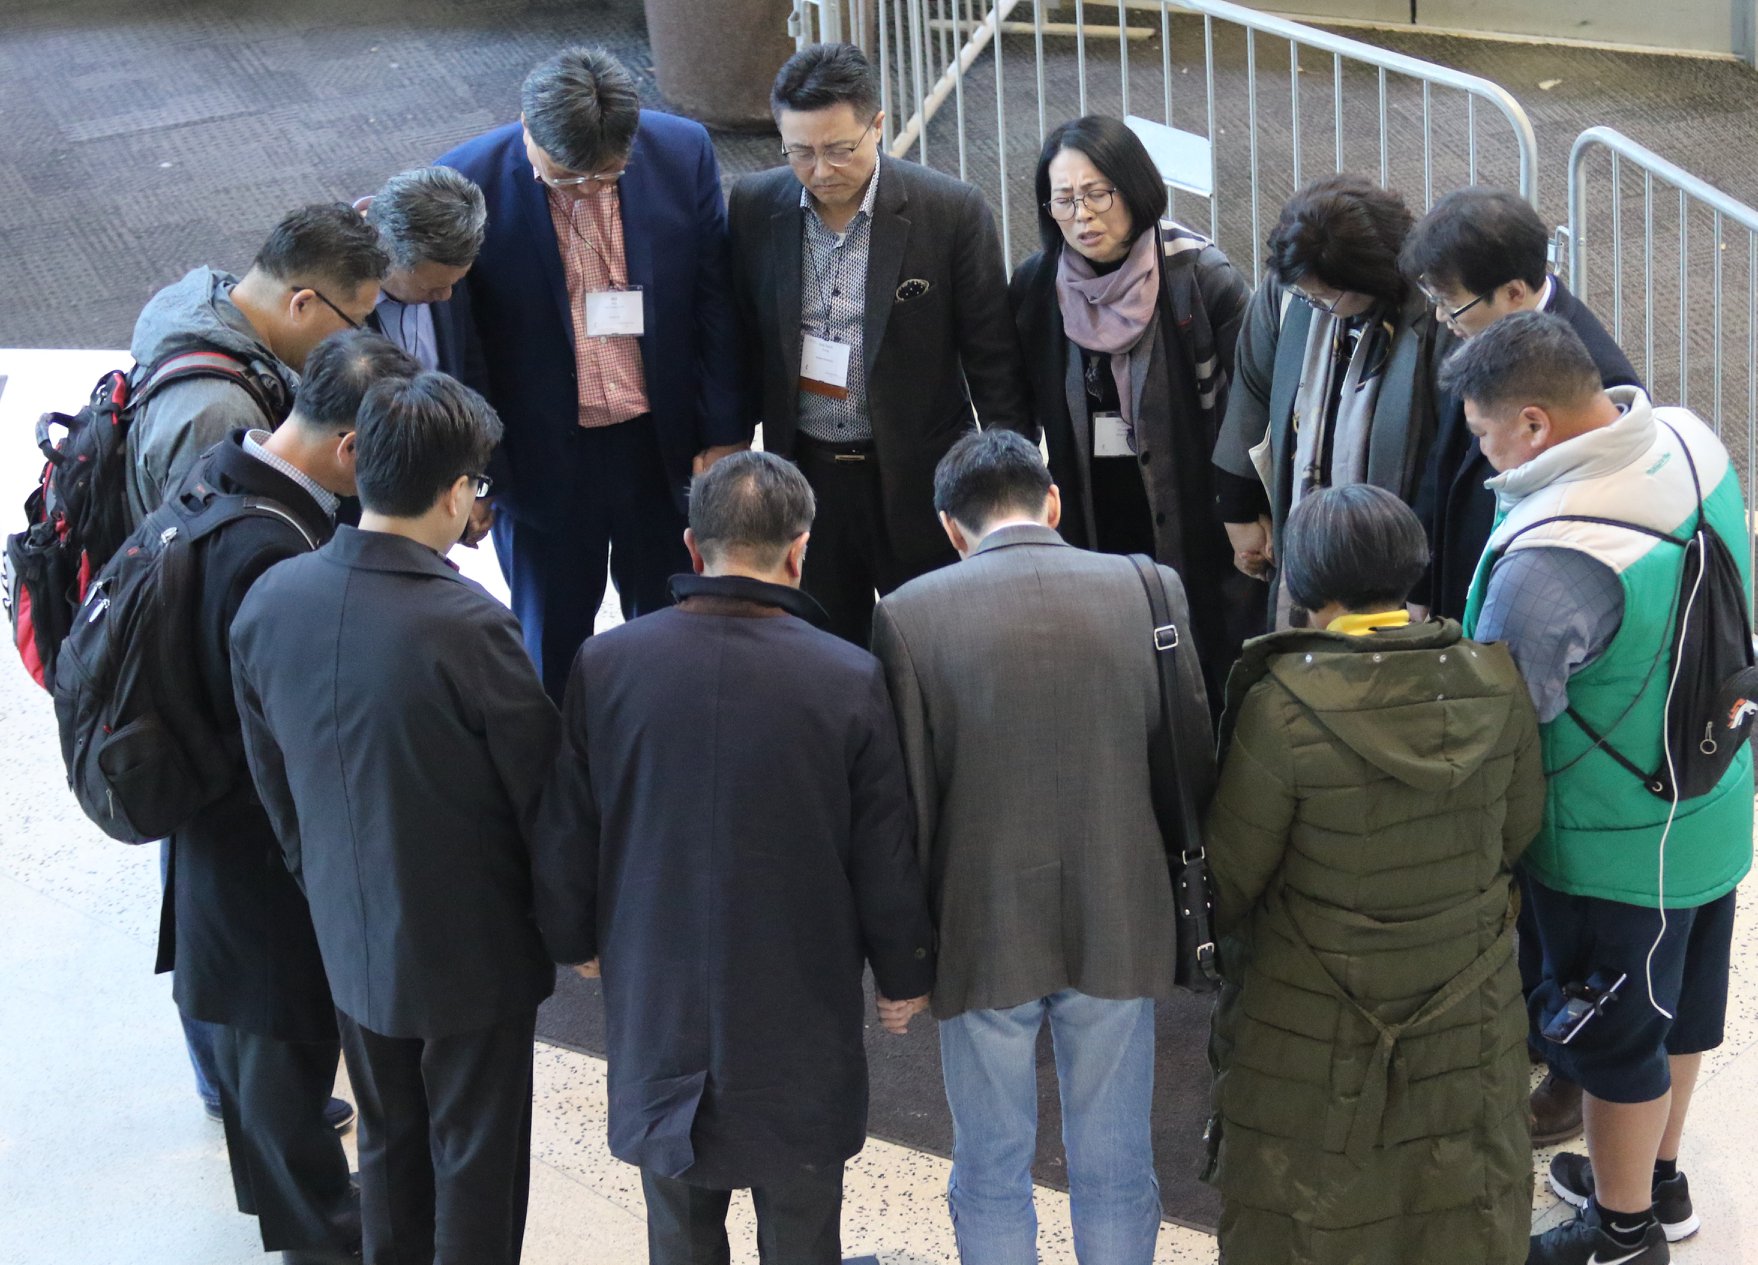 Korean United Methodists gather in prayer during the 2019 General Conference in St. Louis. Photo by the Rev. Thomas Kim, UMNS.